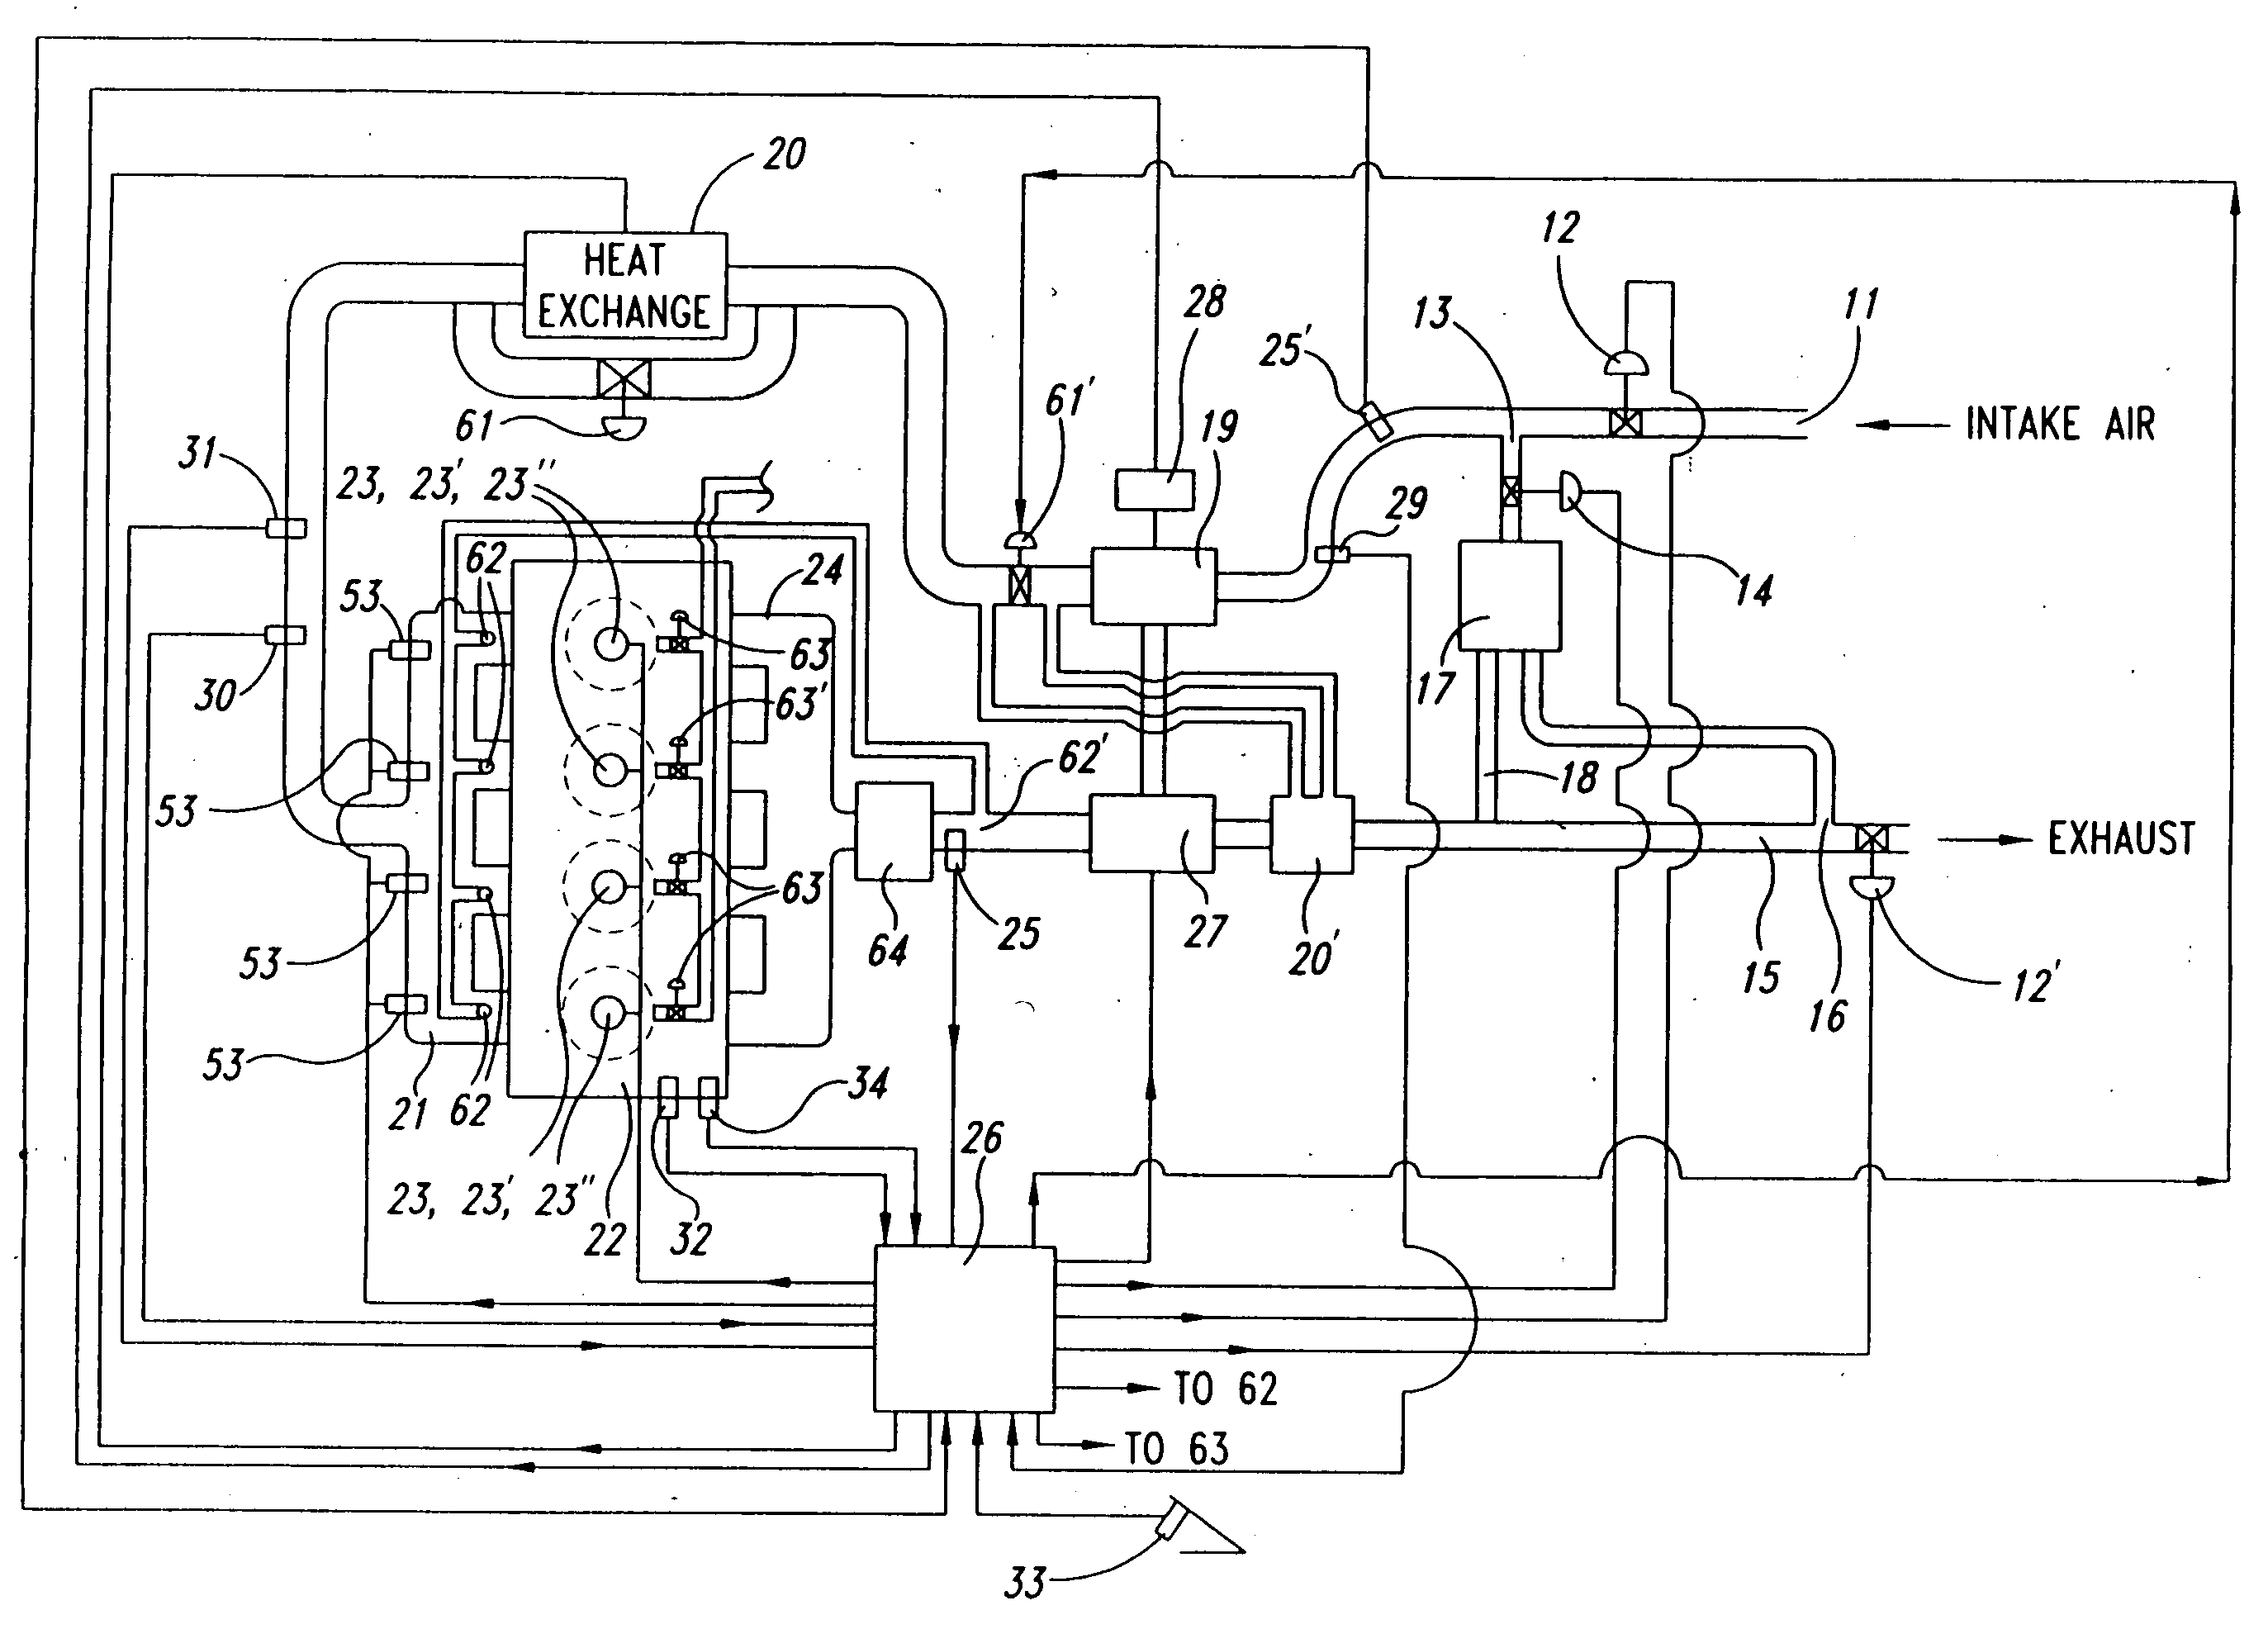 Methods of operation for controlled temperature combustion engines using gasoline-like fuel, particularly multicylinder homogenous charge compression ignition (HCCI) engines